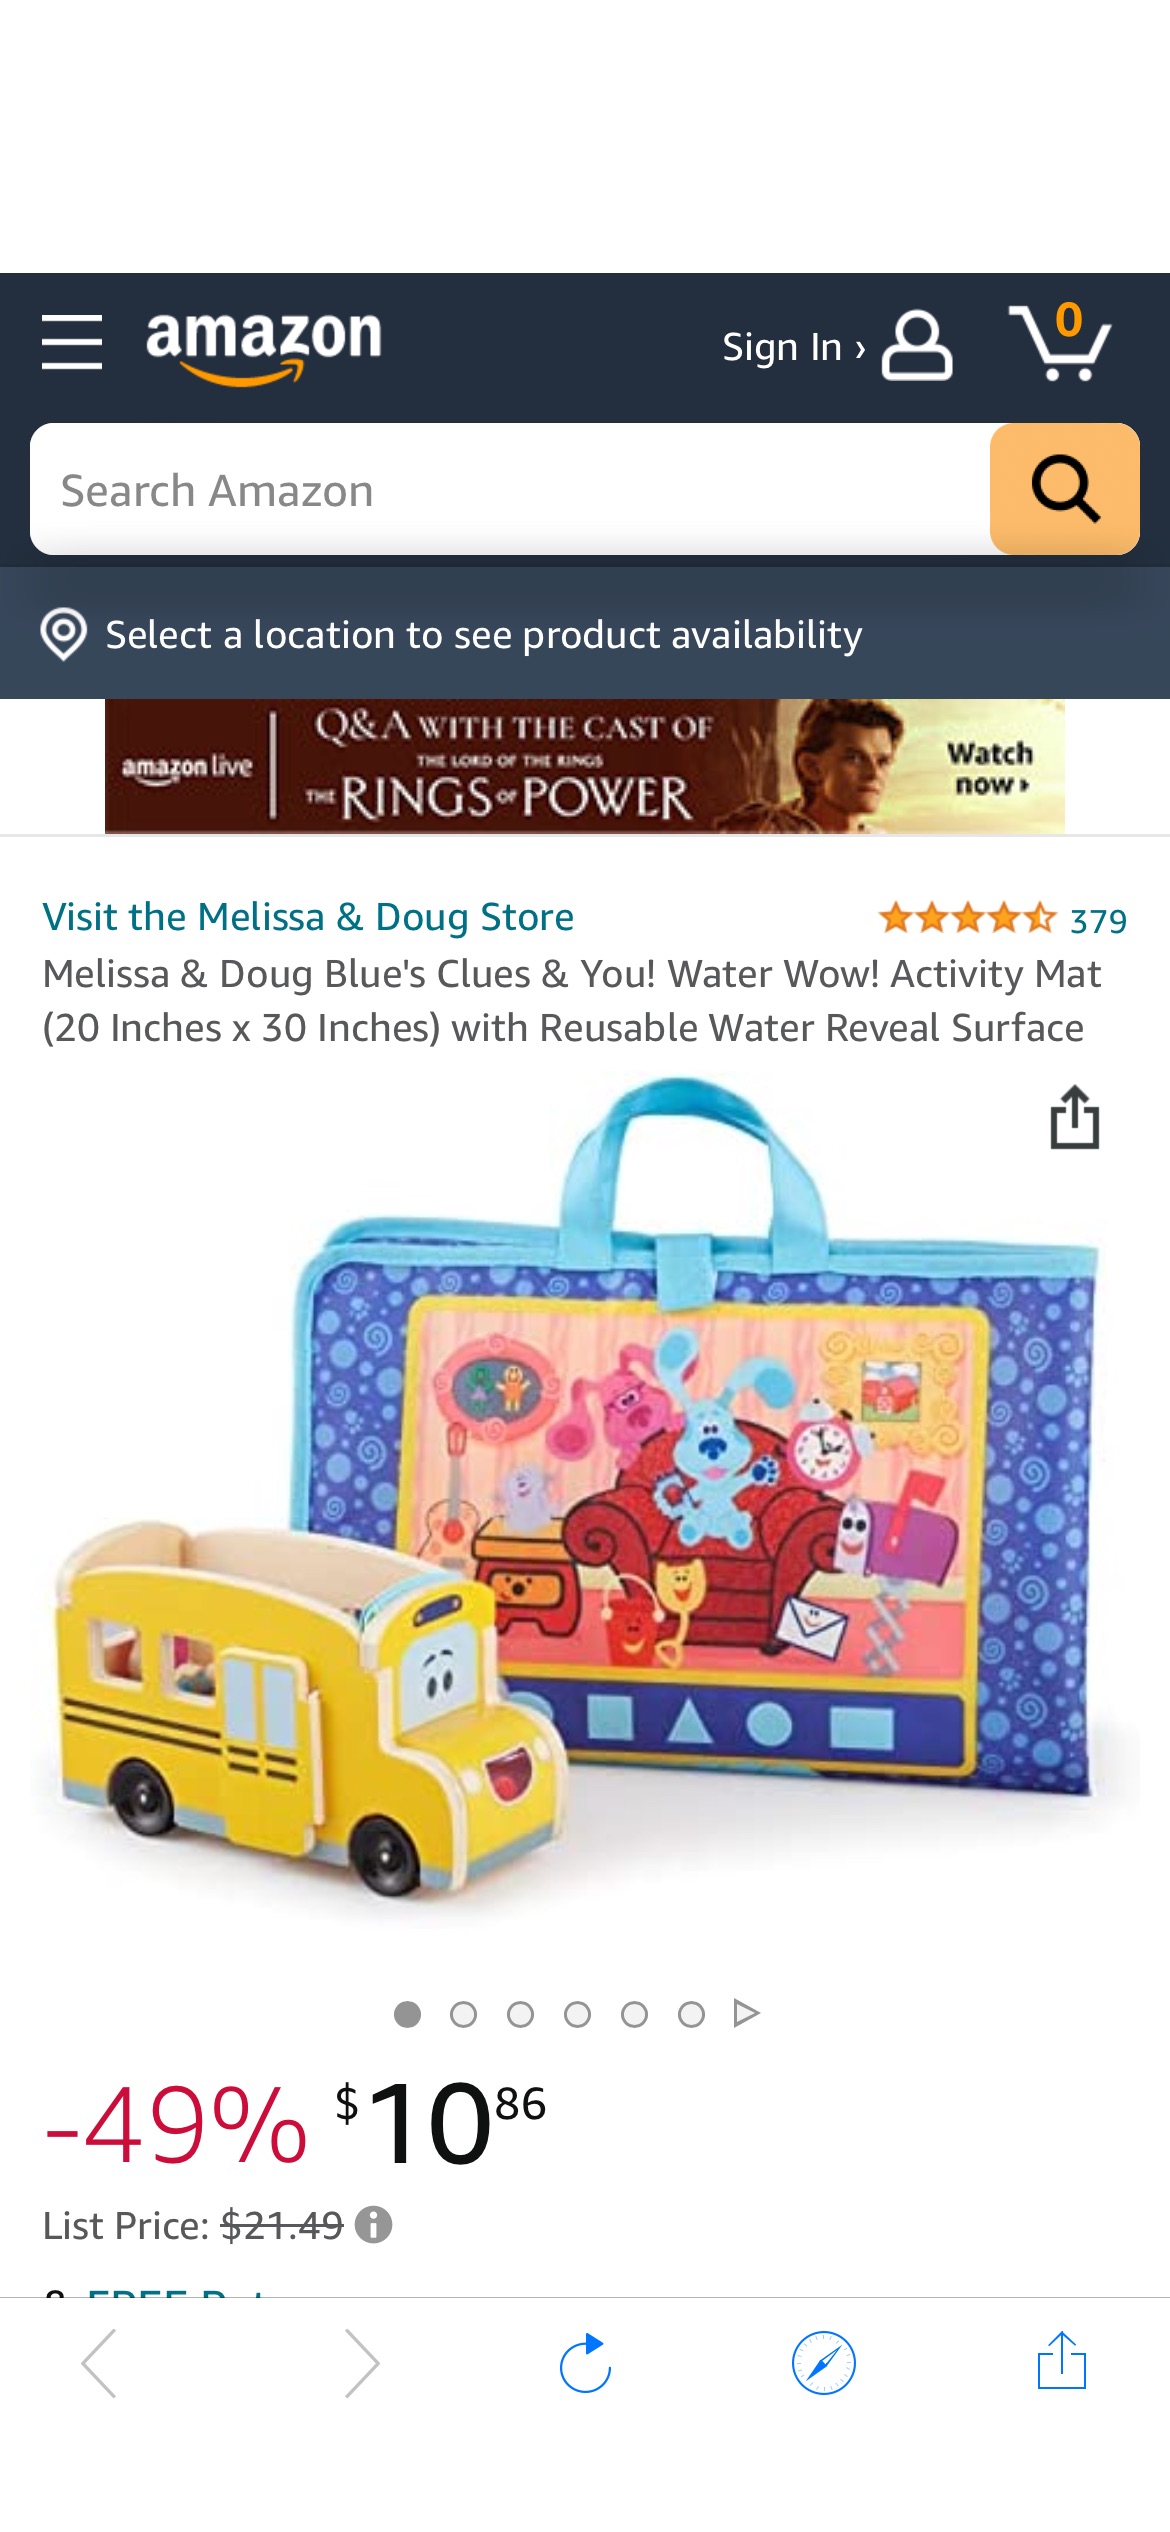 Amazon.com: Melissa & Doug Blue's Clues & You! Water Wow! Activity Mat (20 Inches x 30 Inches) with Reusable Water Reveal Surface : Toys & Games校车